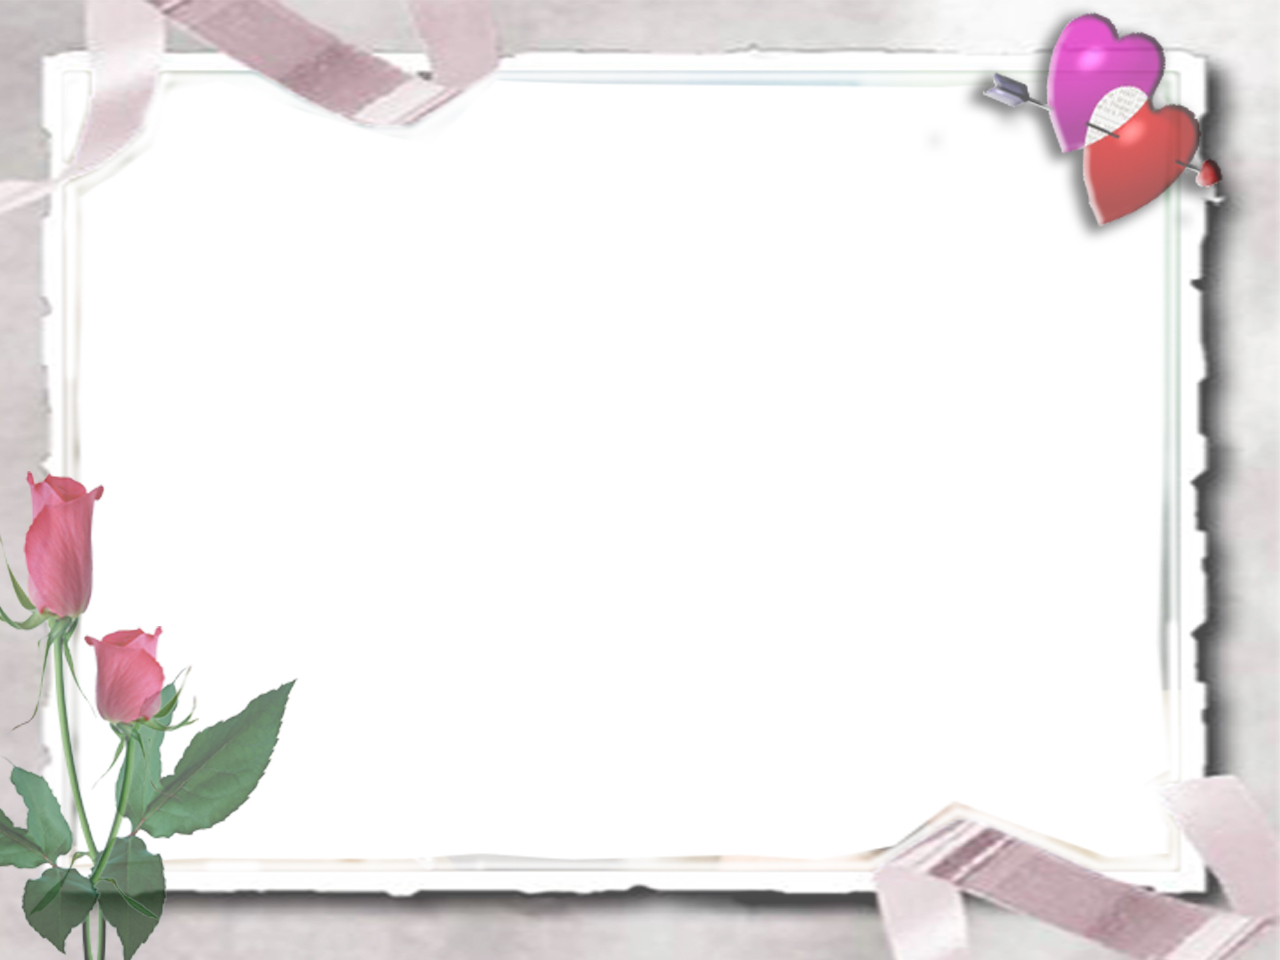 download wallpaper cantik,picture frame,heart,plant,rectangle,flower